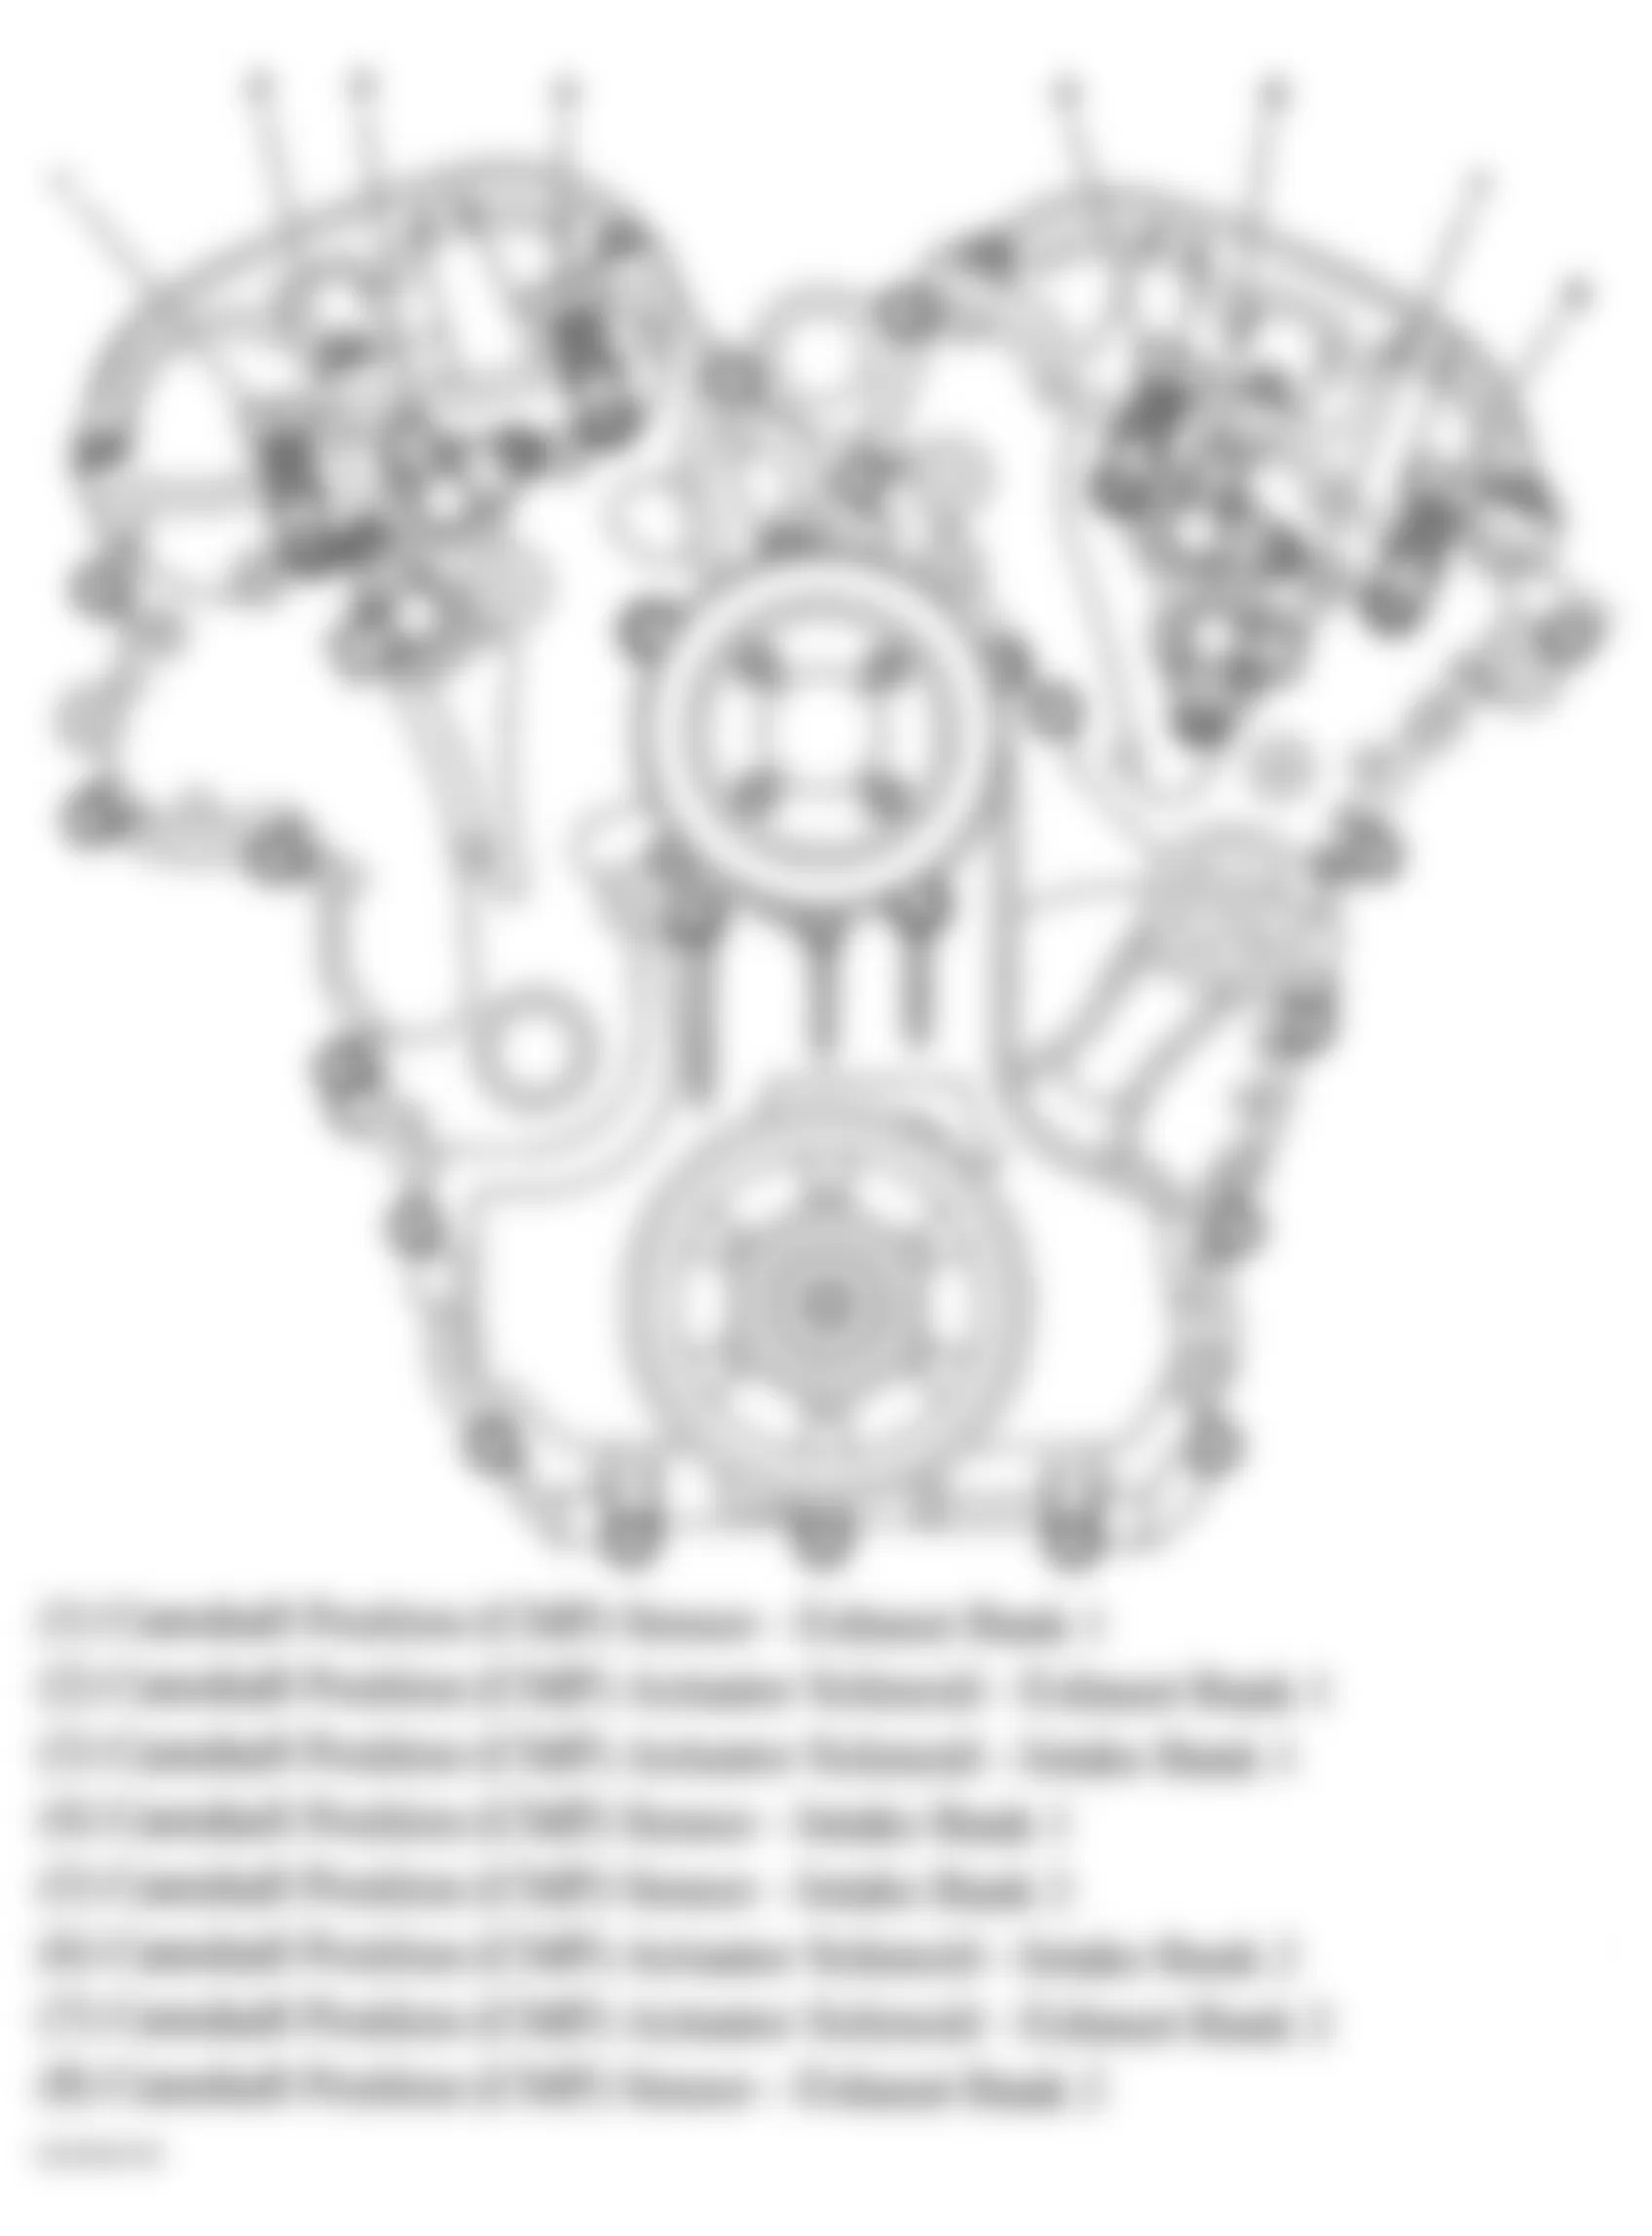 Buick LaCrosse CXL 2008 - Component Locations -  Front Of Engine (3.6L)